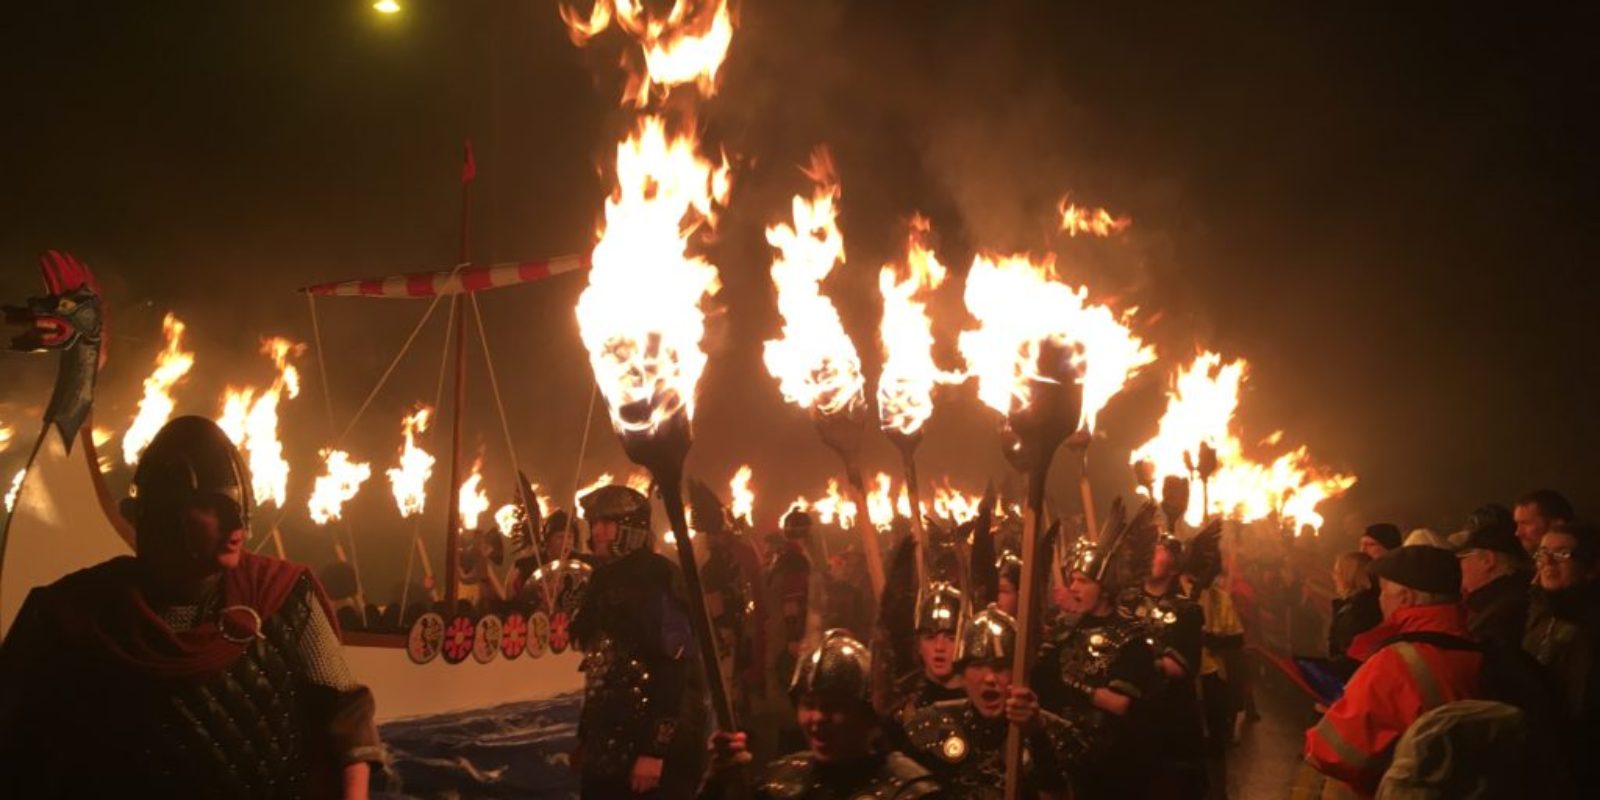 I recently experienced the sensational Up Helly Aa in the Shetland Islands, Scotland. Influenced by the Vikings, it dates back to the late 1800s. What is Up Helly Aa? How do you experience this wild night? ... As time inched closer to 7:30, I could literally feel the anticipation building In the darkness ahead of me...